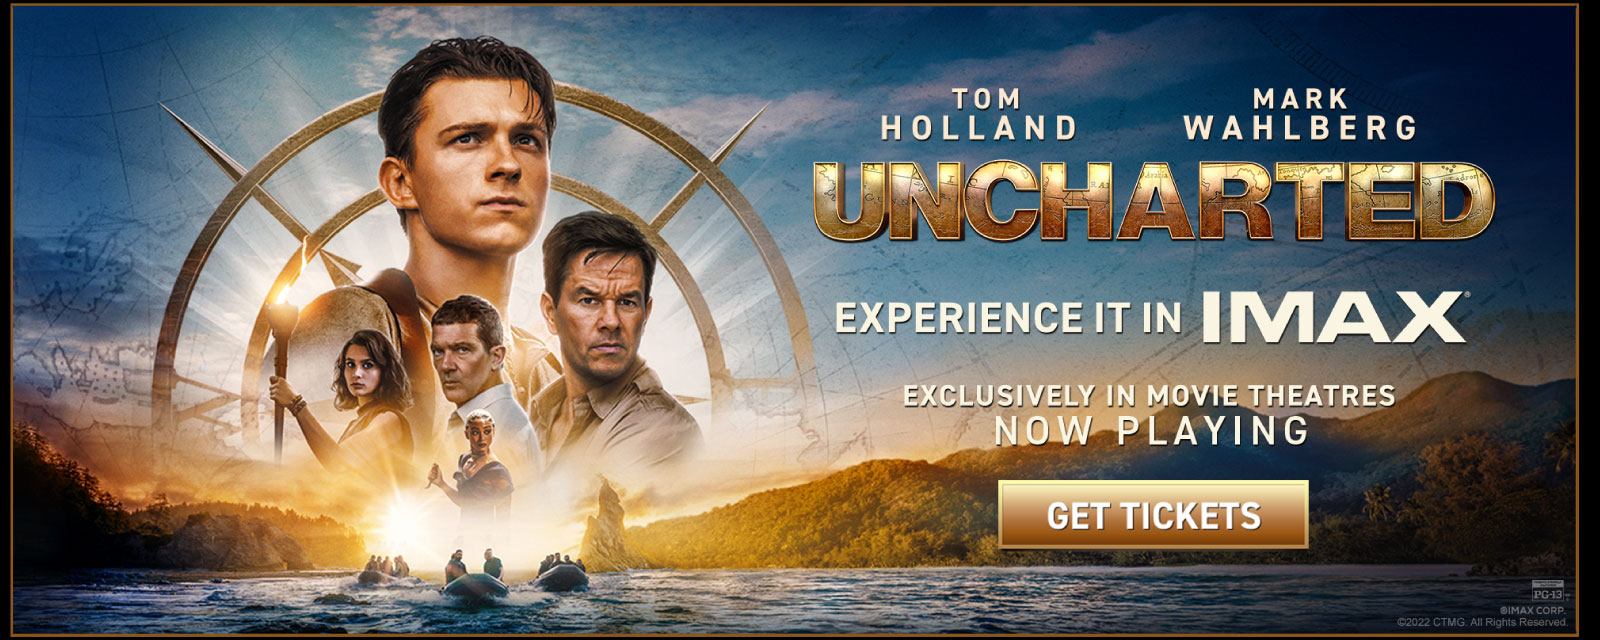 uncharted movie times